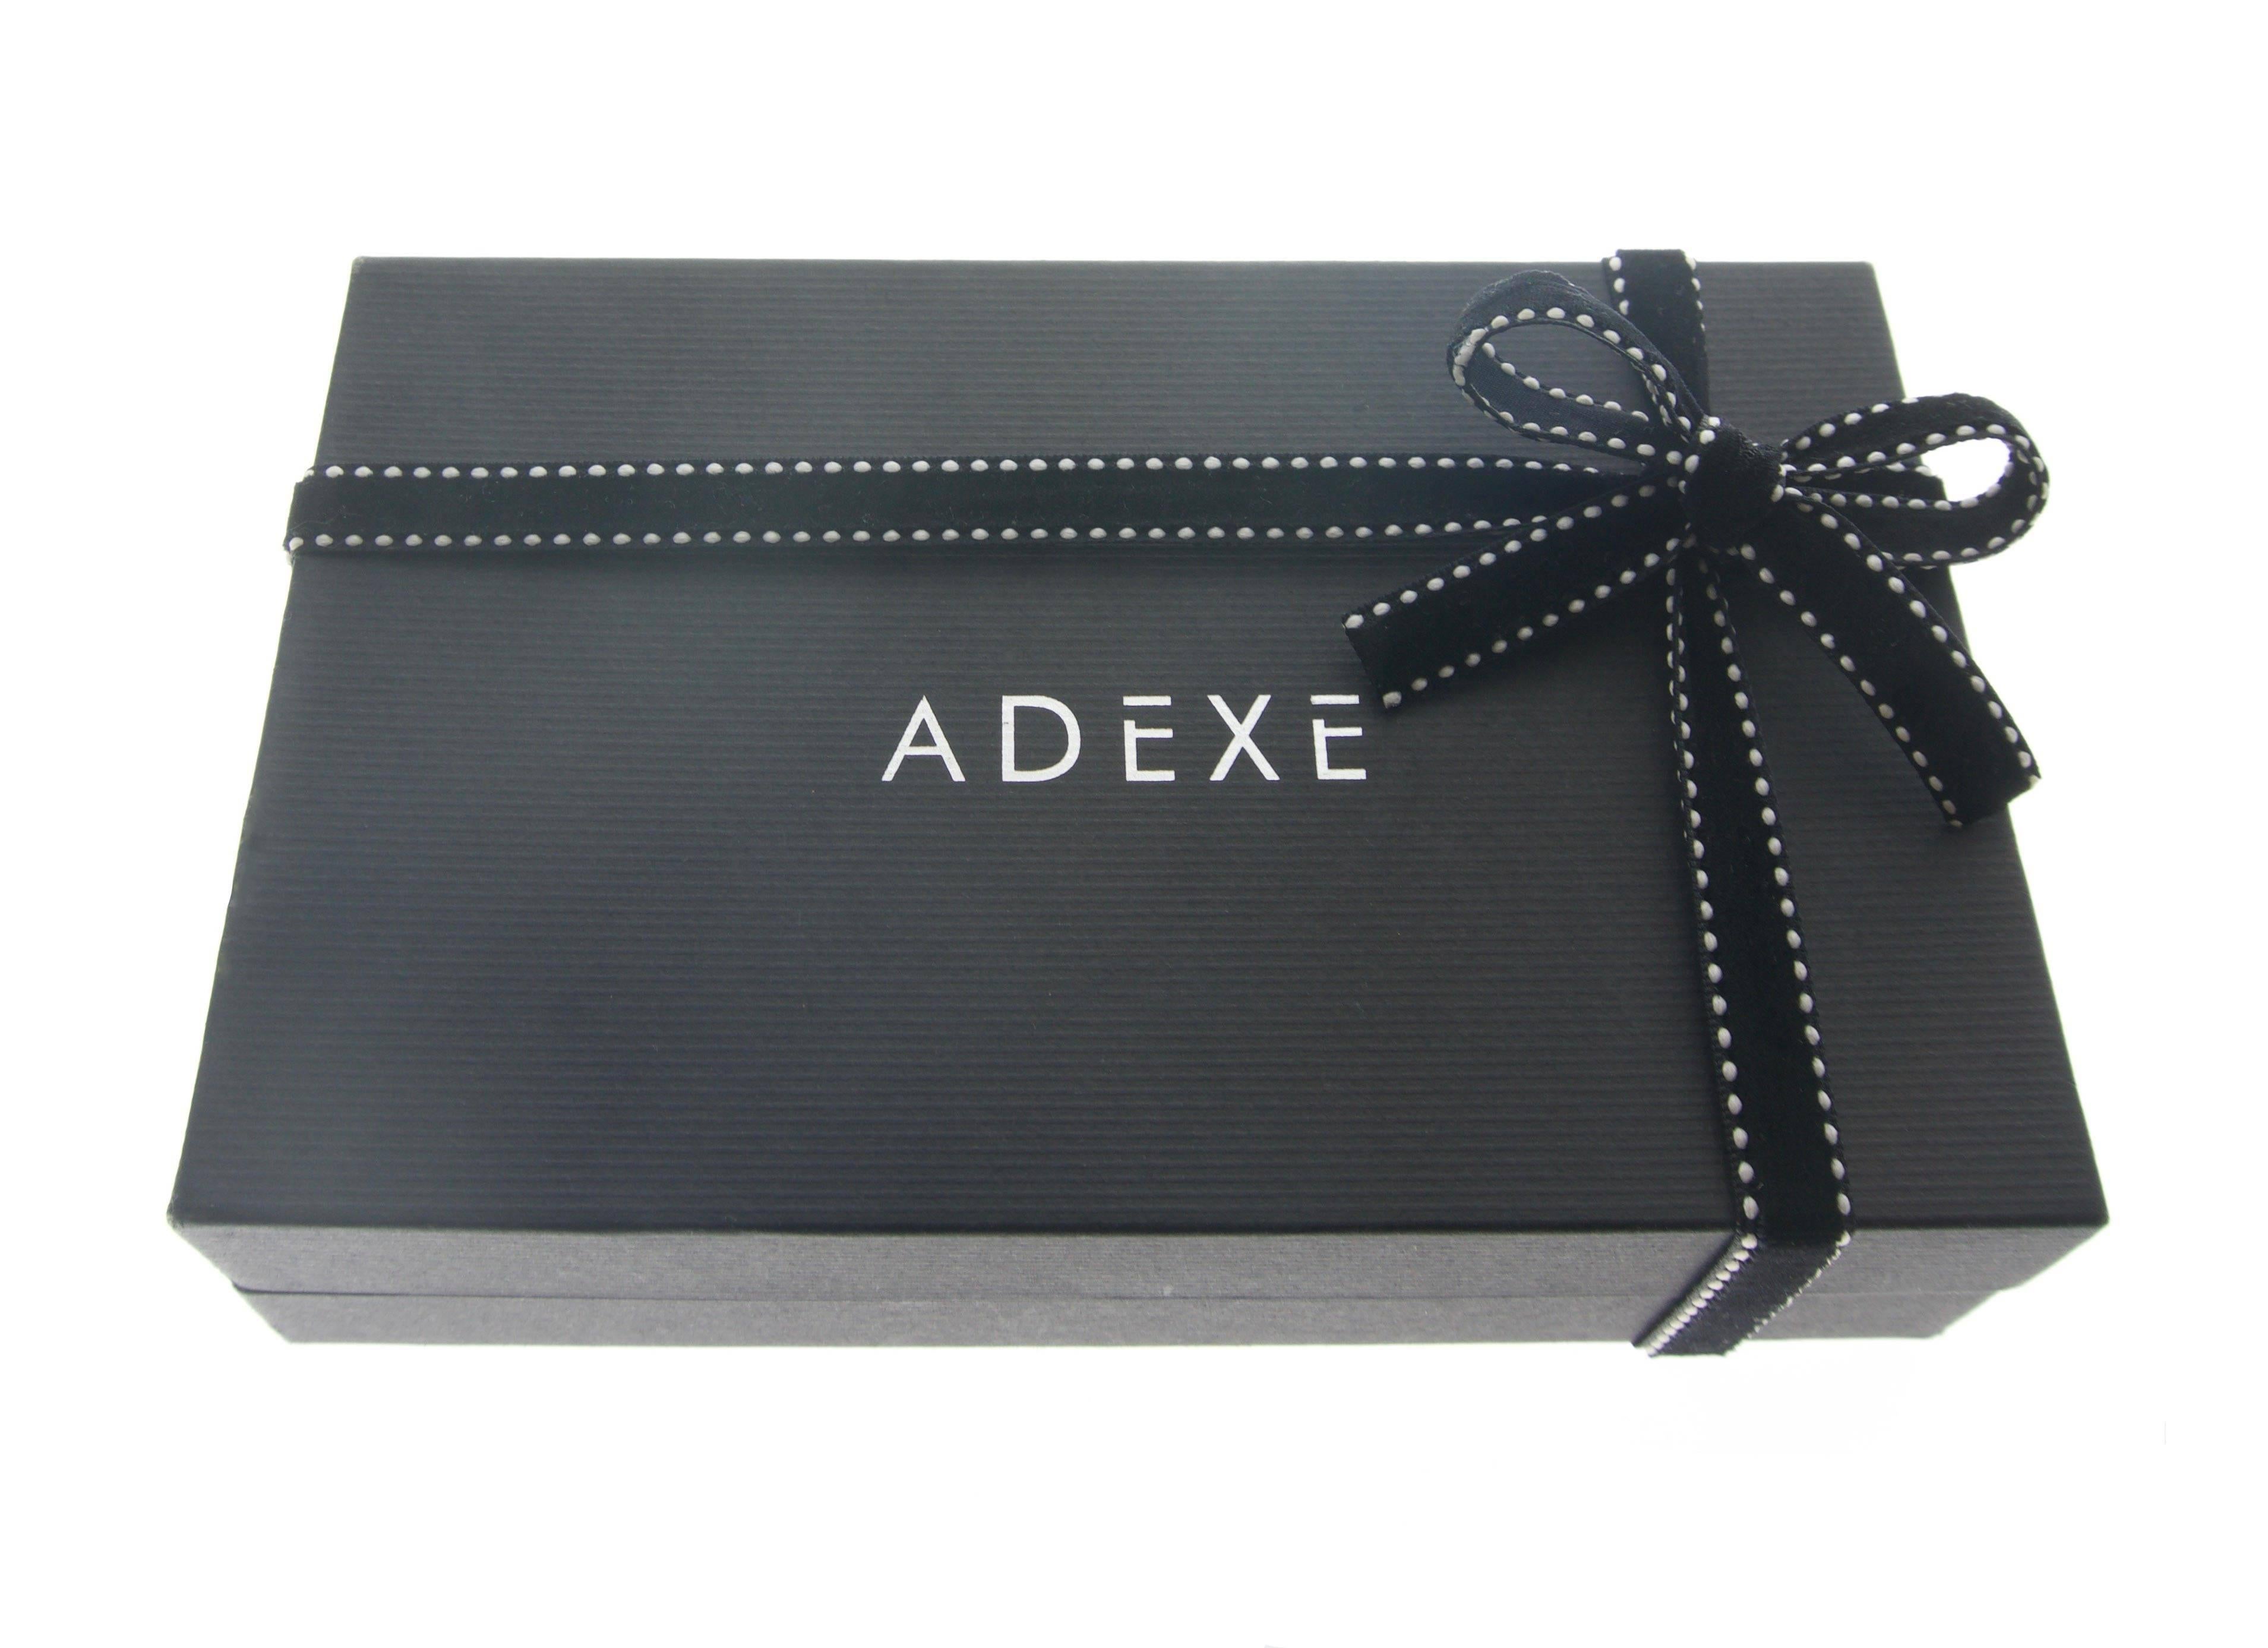 ADEXE Watches Petite Pink Edgy Summer Quartz Watch In New Condition For Sale In London, GB